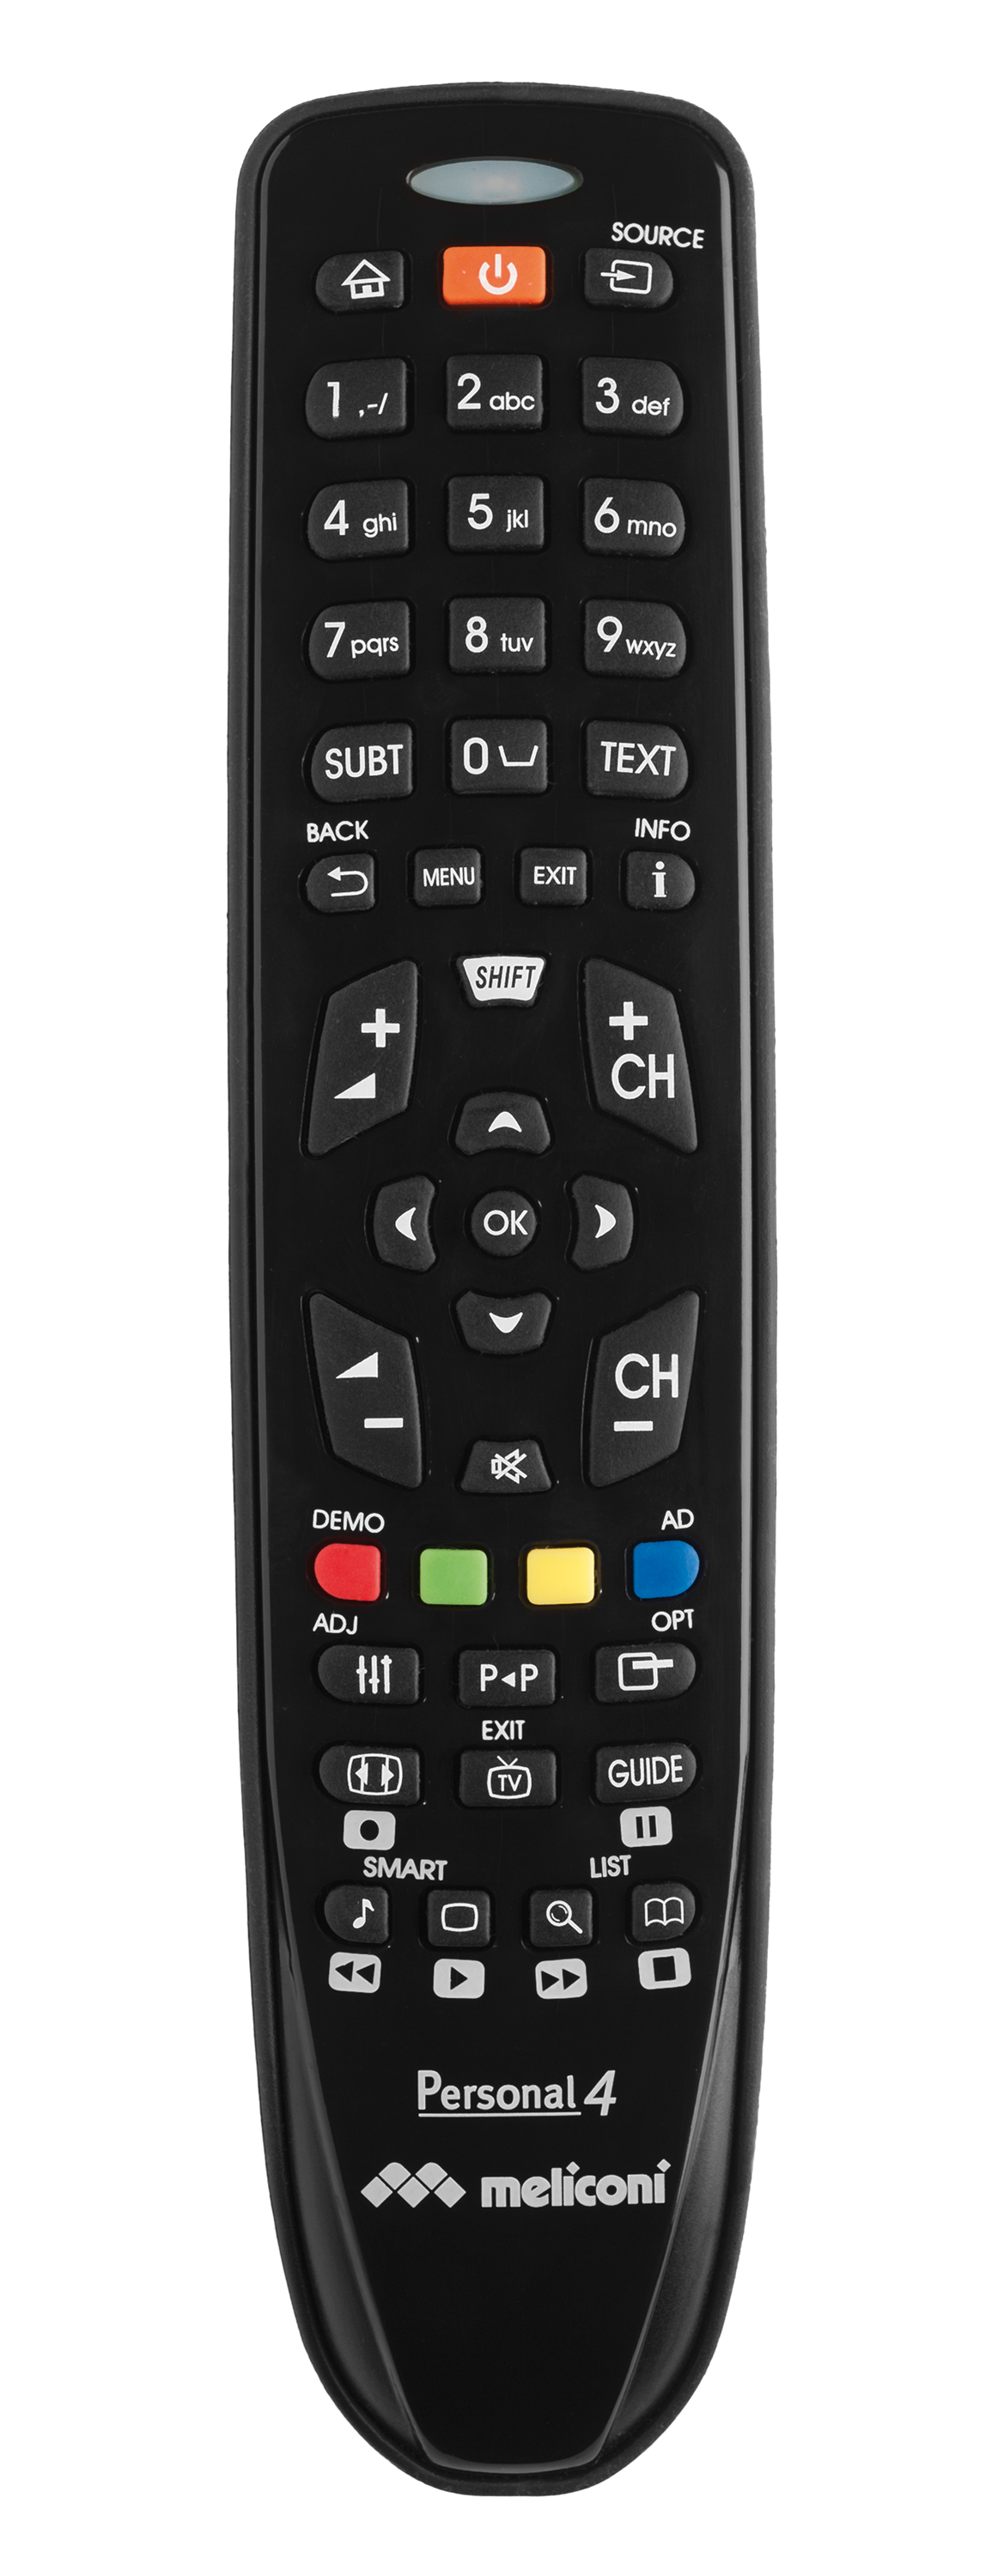 Gumbody personal 4 +, tlcommande universelle Philips tv ready to use rubb